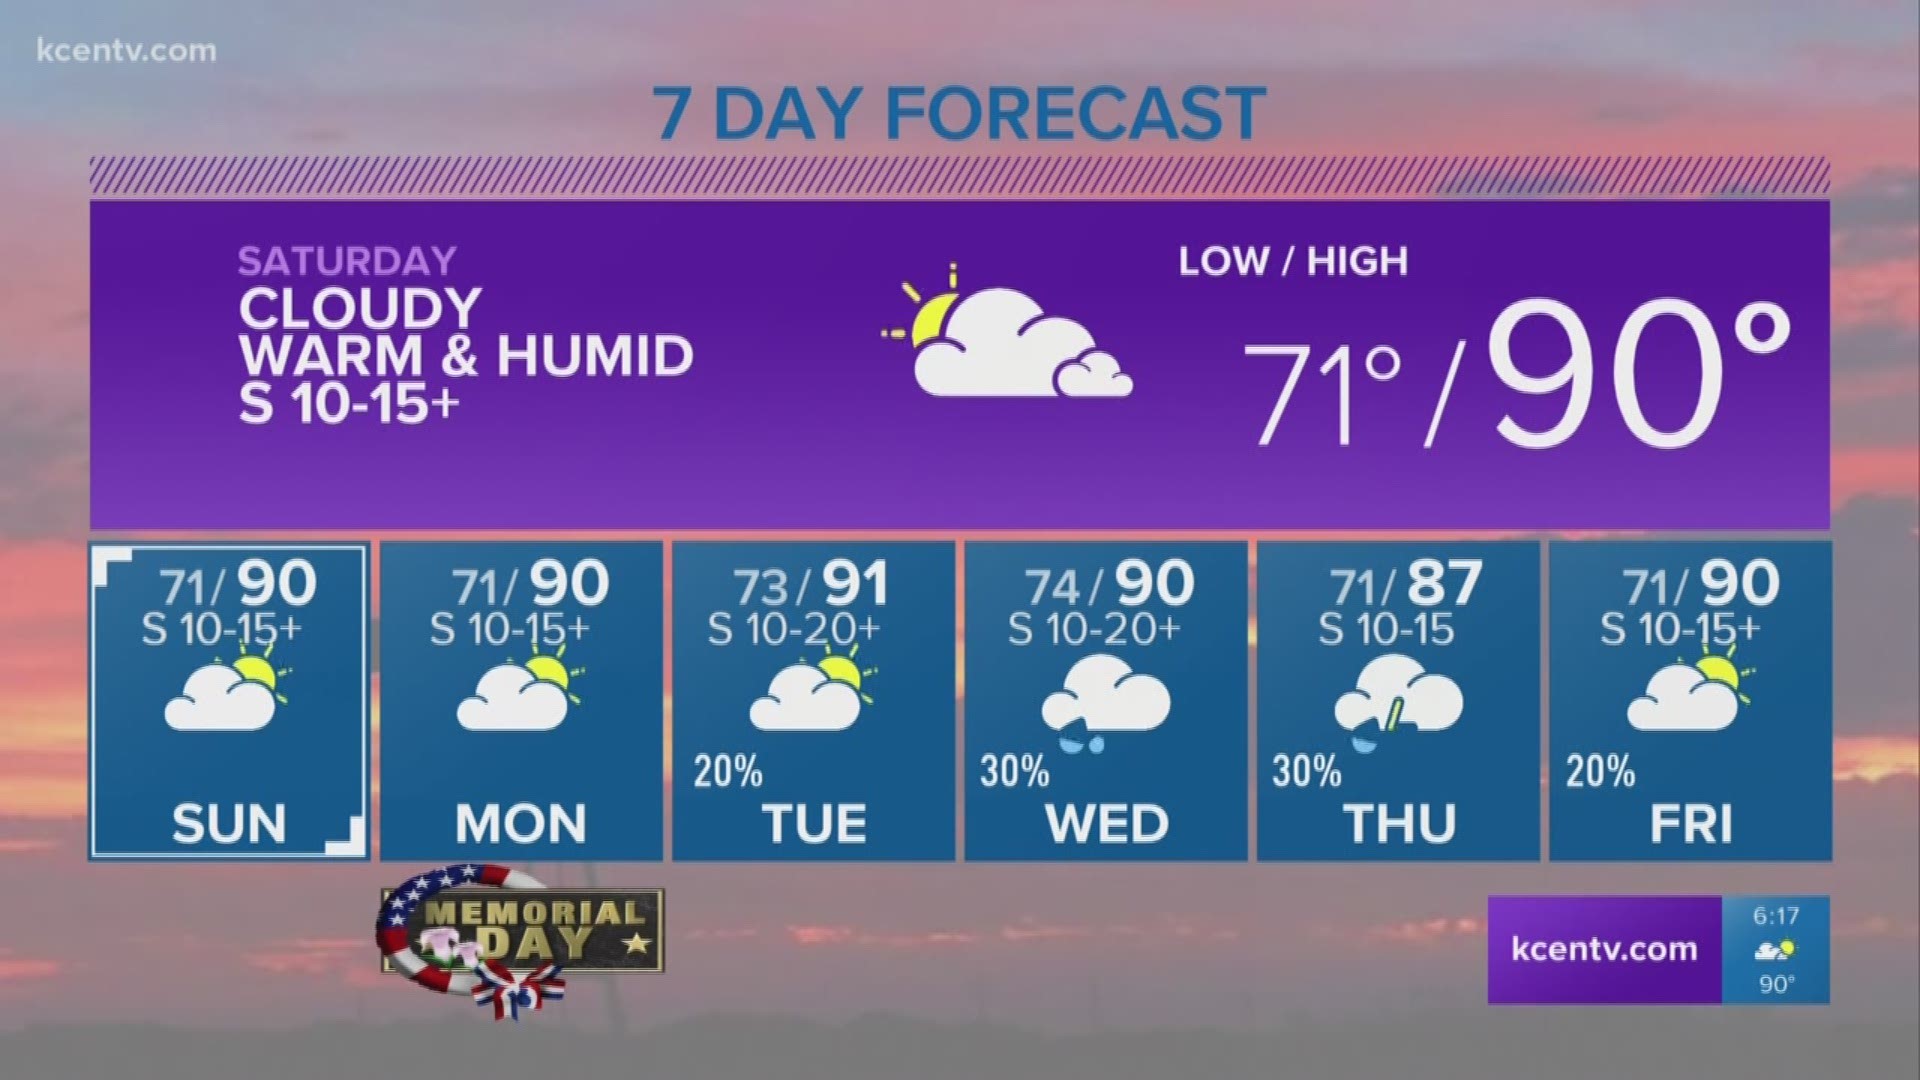 Andy's evening forecast May 24, 2019